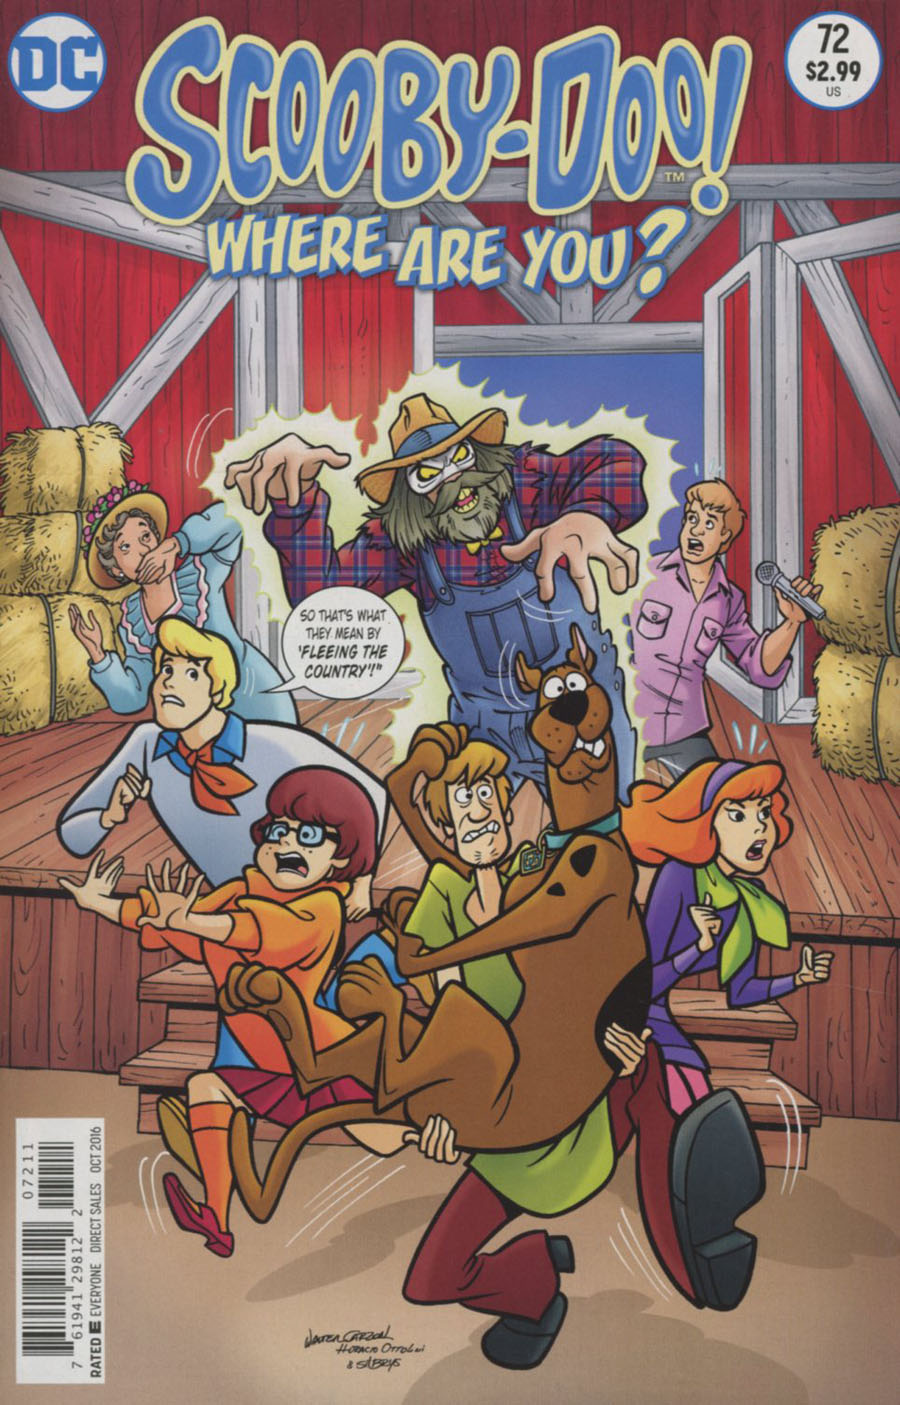 Scooby-Doo Where Are You #72